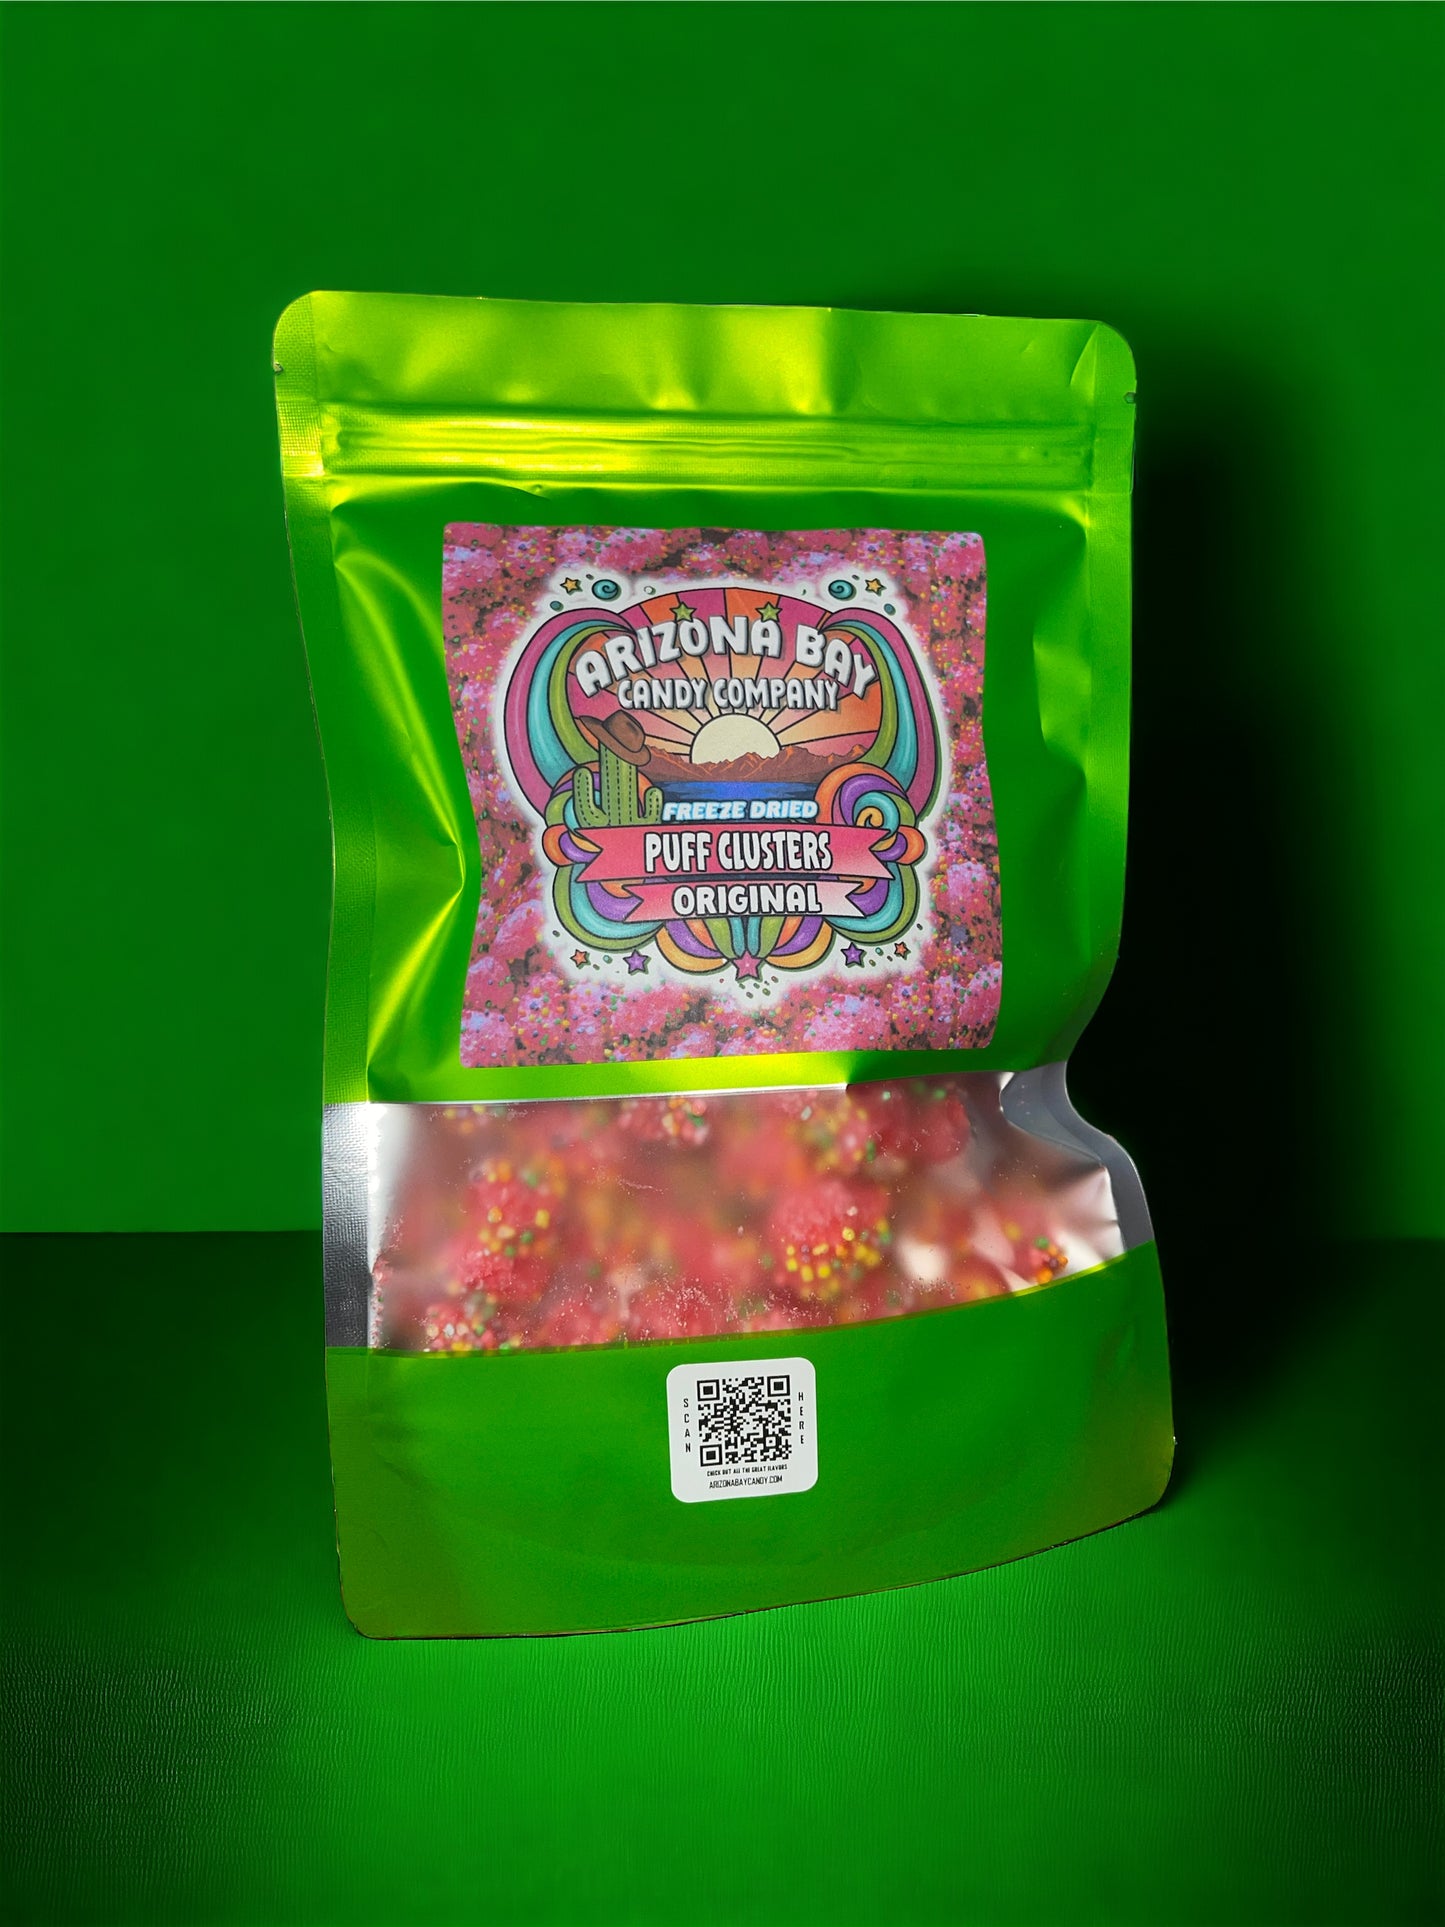 ORIGINAL PUFF CLUSTERS FREEZE DRIED CANDY